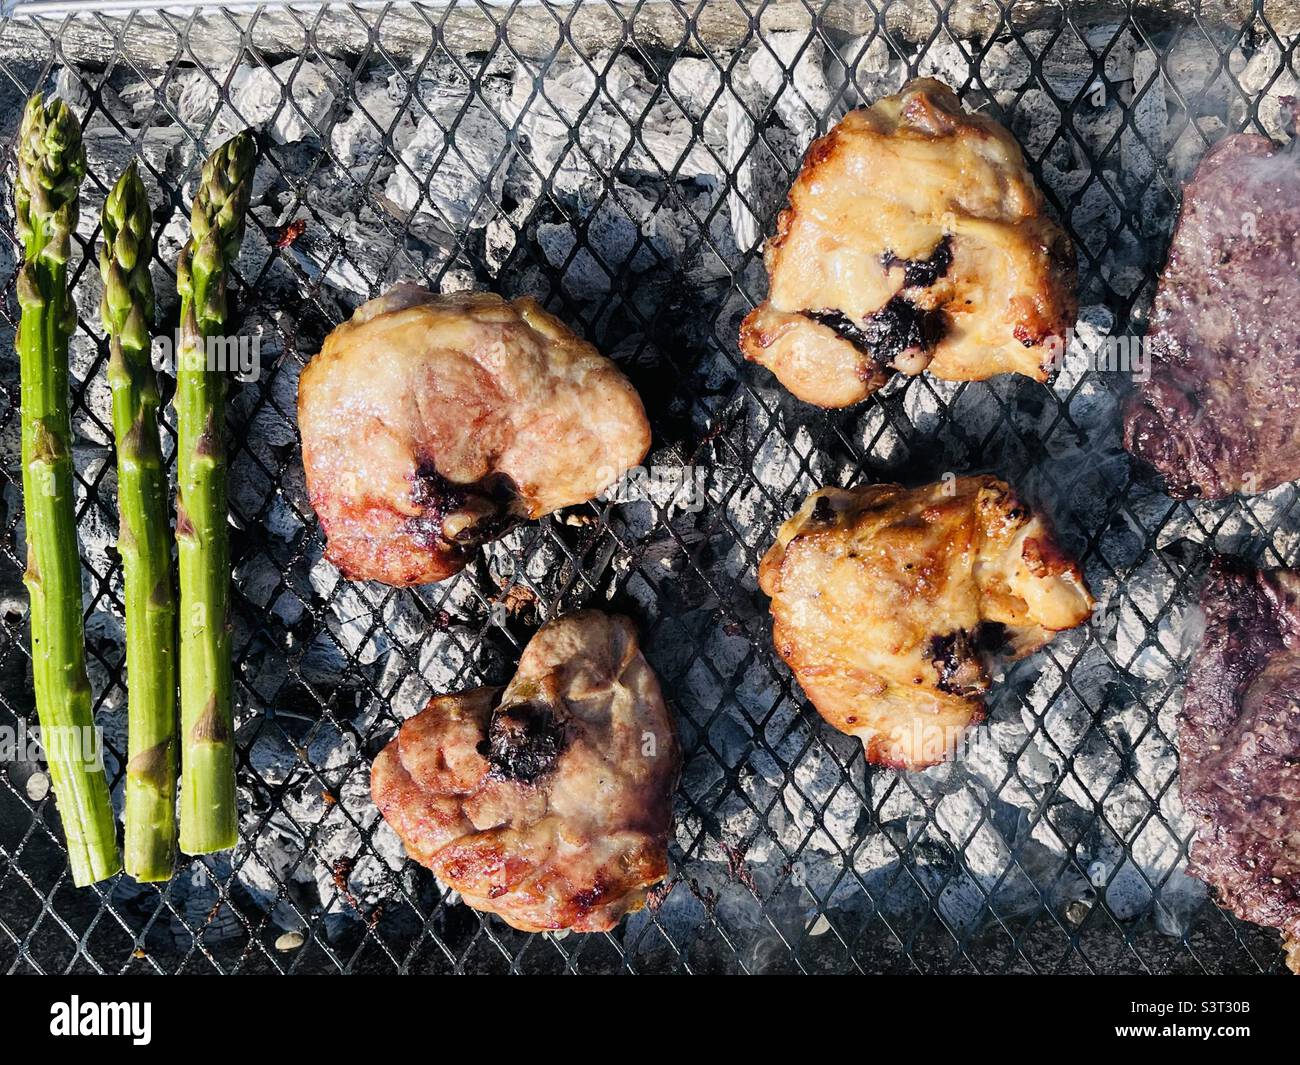 Asparagus chicken and beef steaks on a barbecue Stock Photo